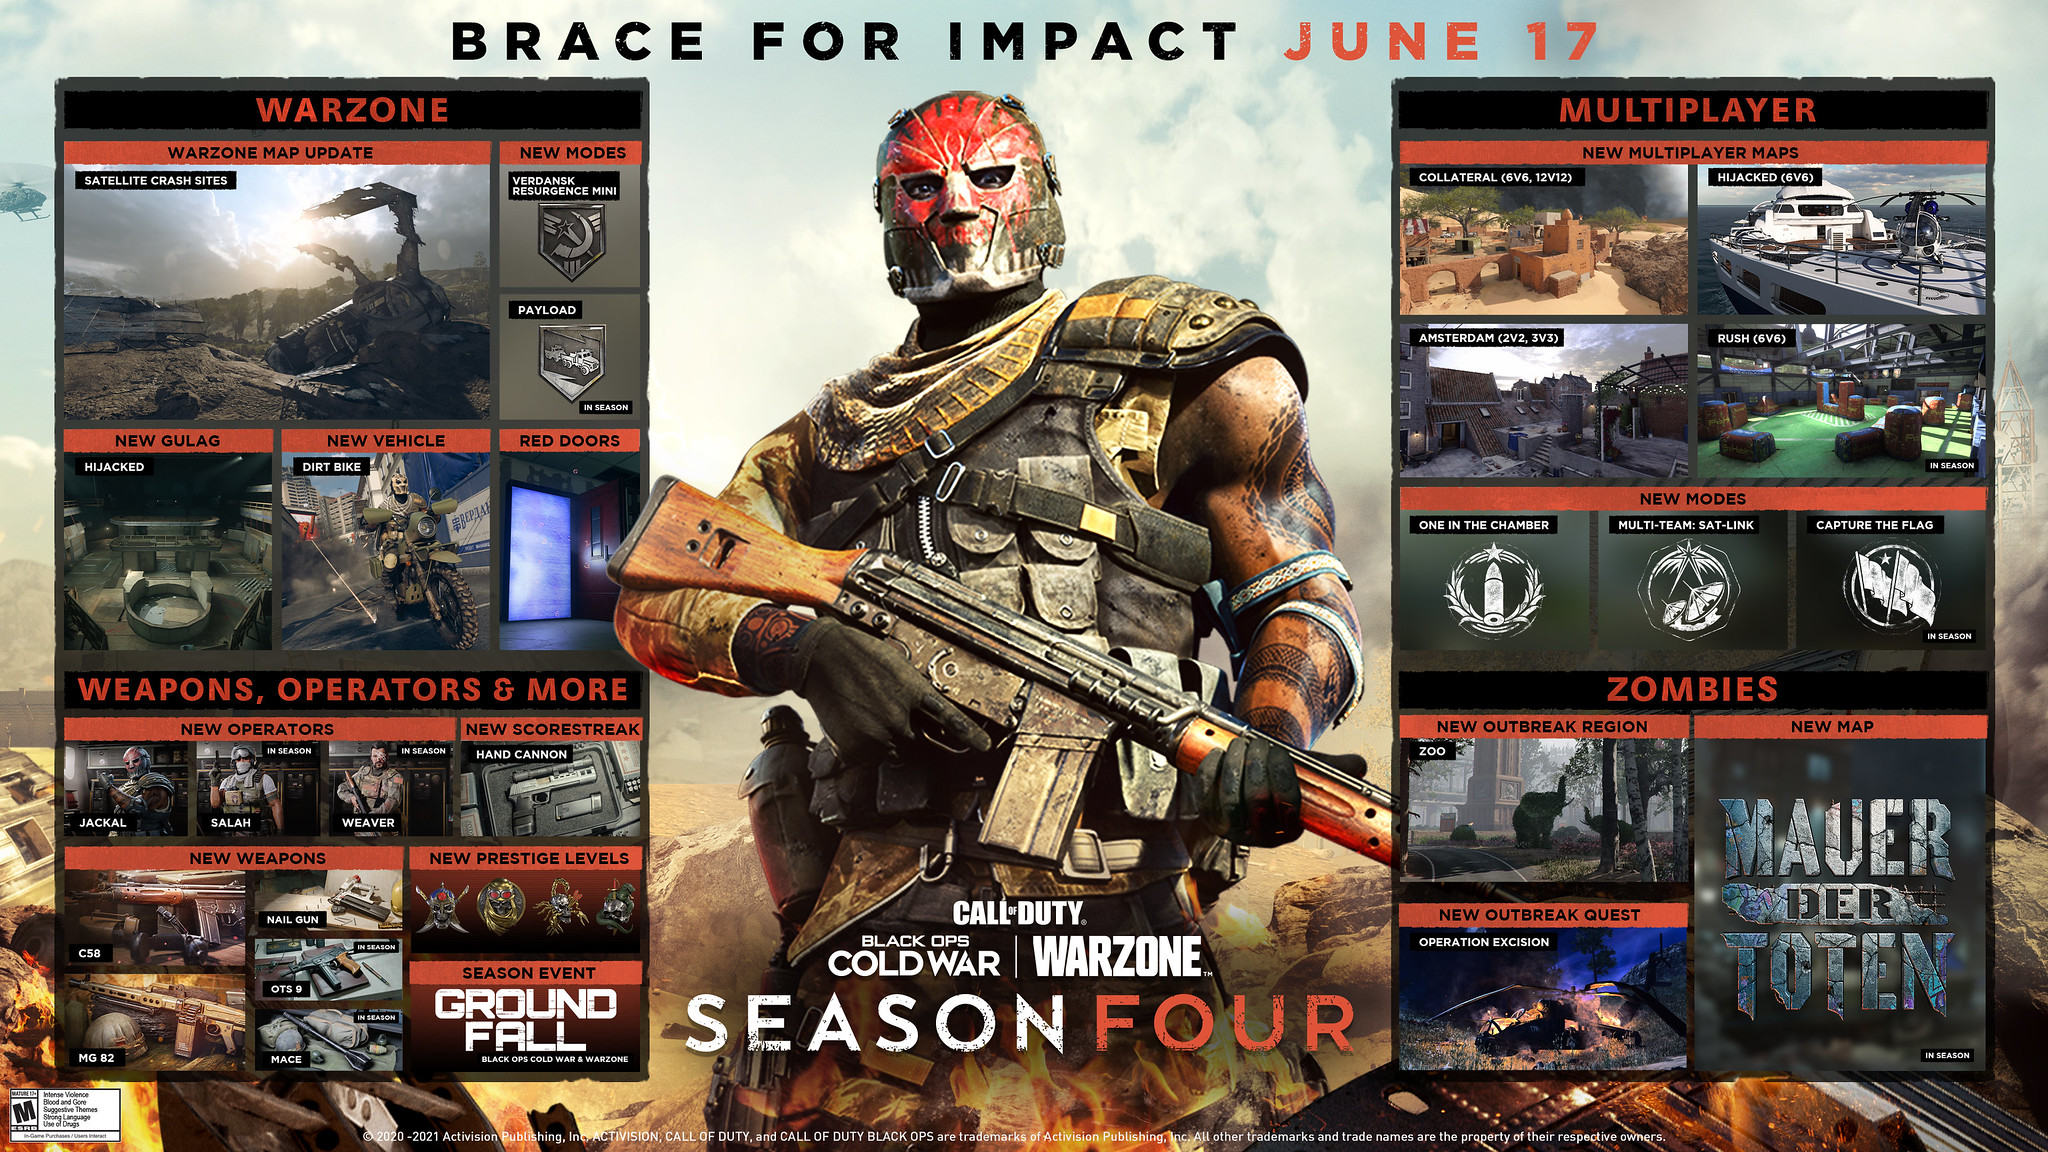 Season Four of Black Ops Cold War and Warzone lands June 17